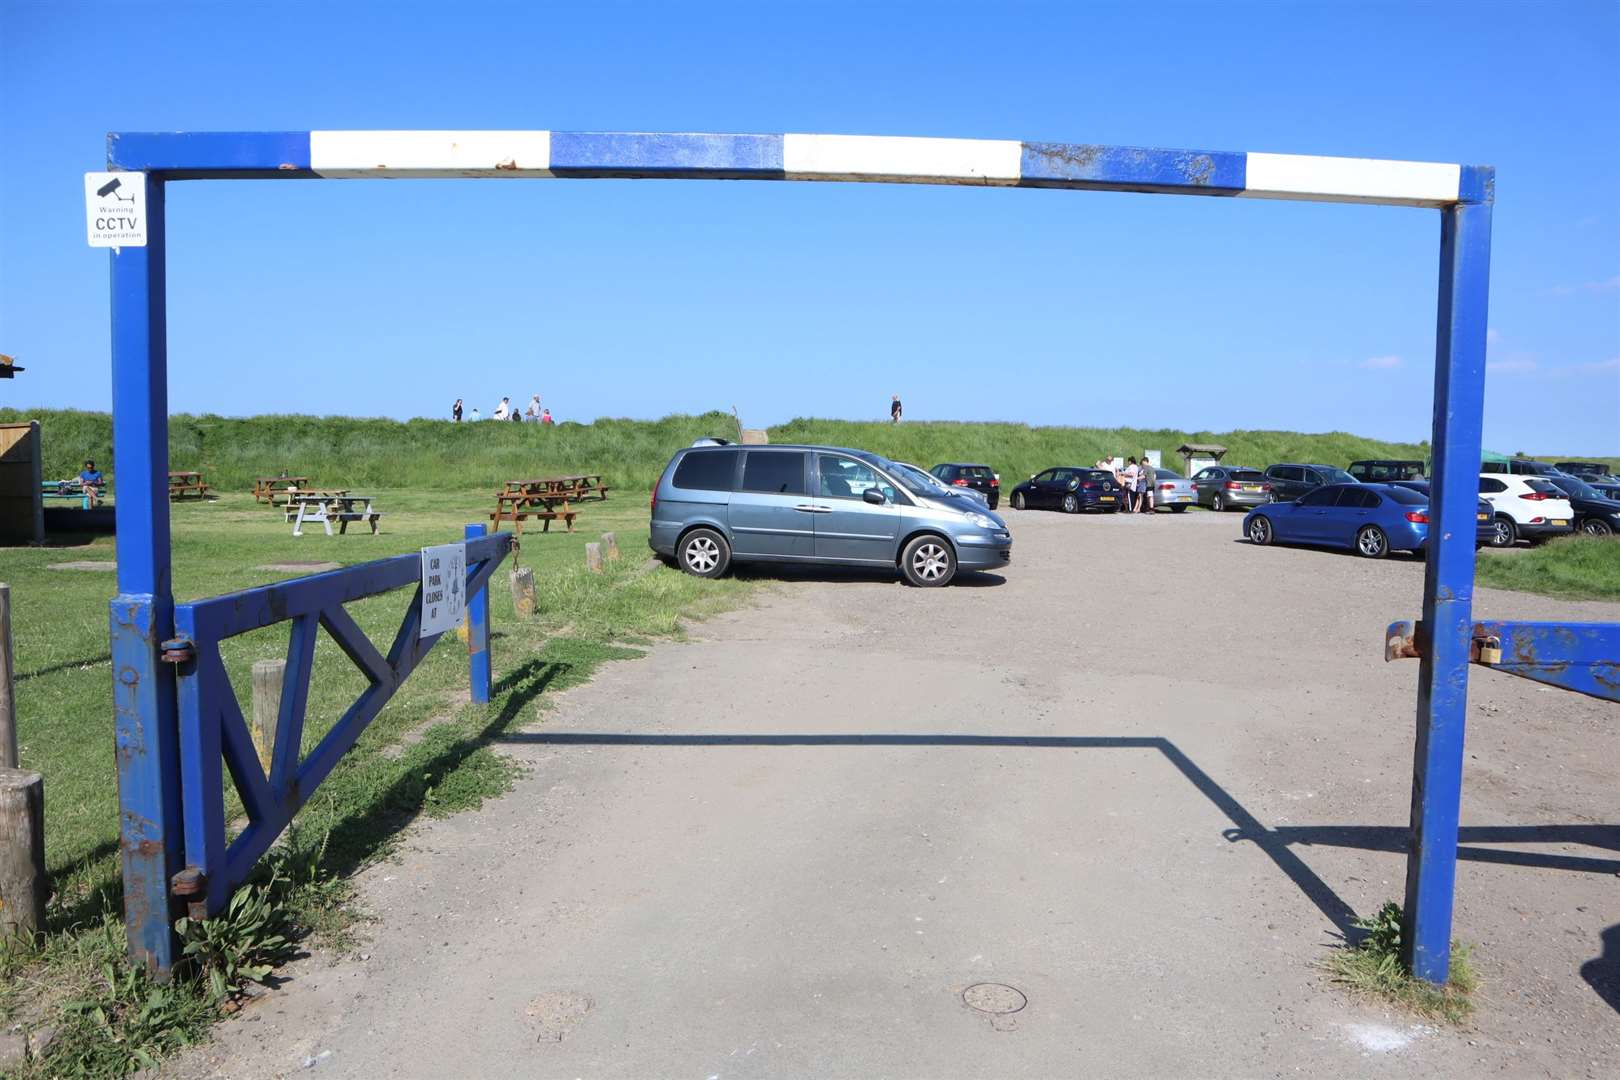 Neptune car park at Leysdown on Sheppey has height limits